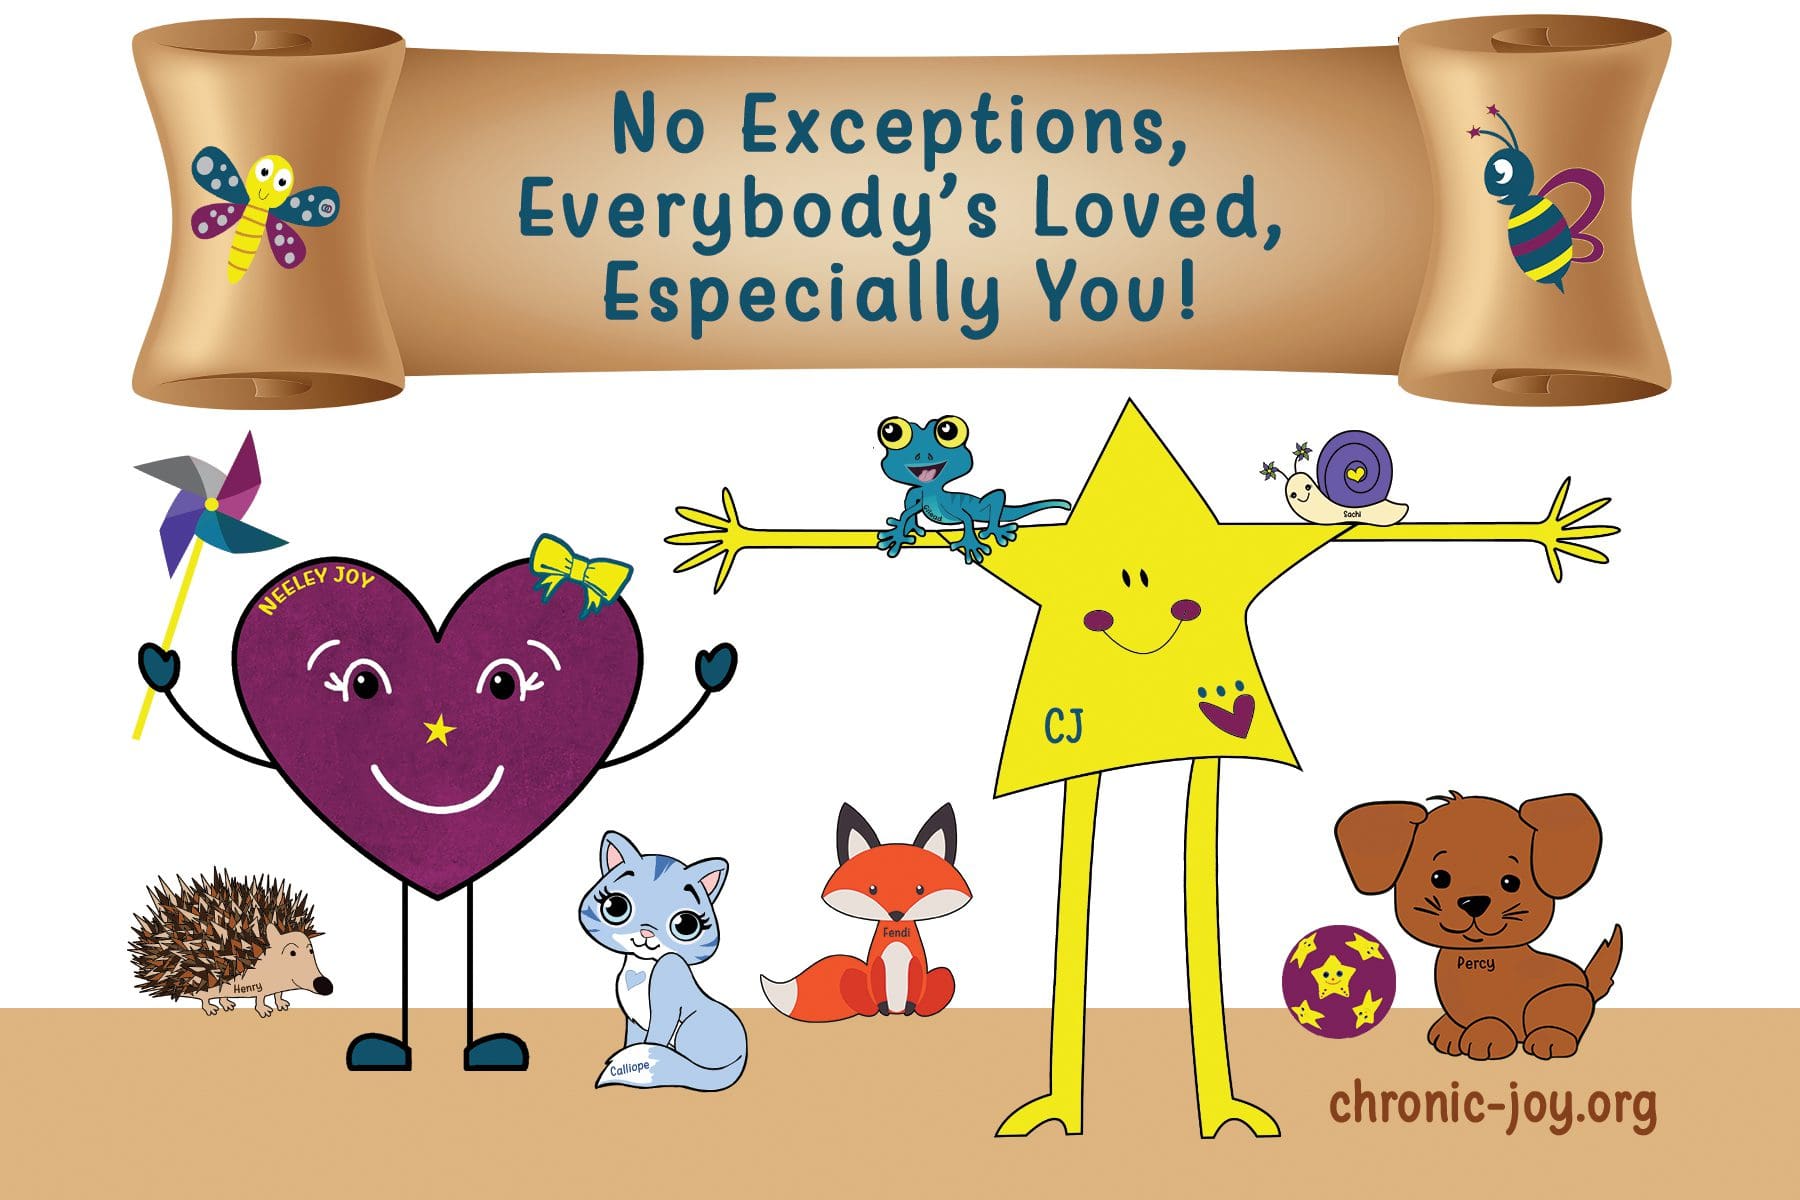 No exceptions, everybody's loved, especially you.